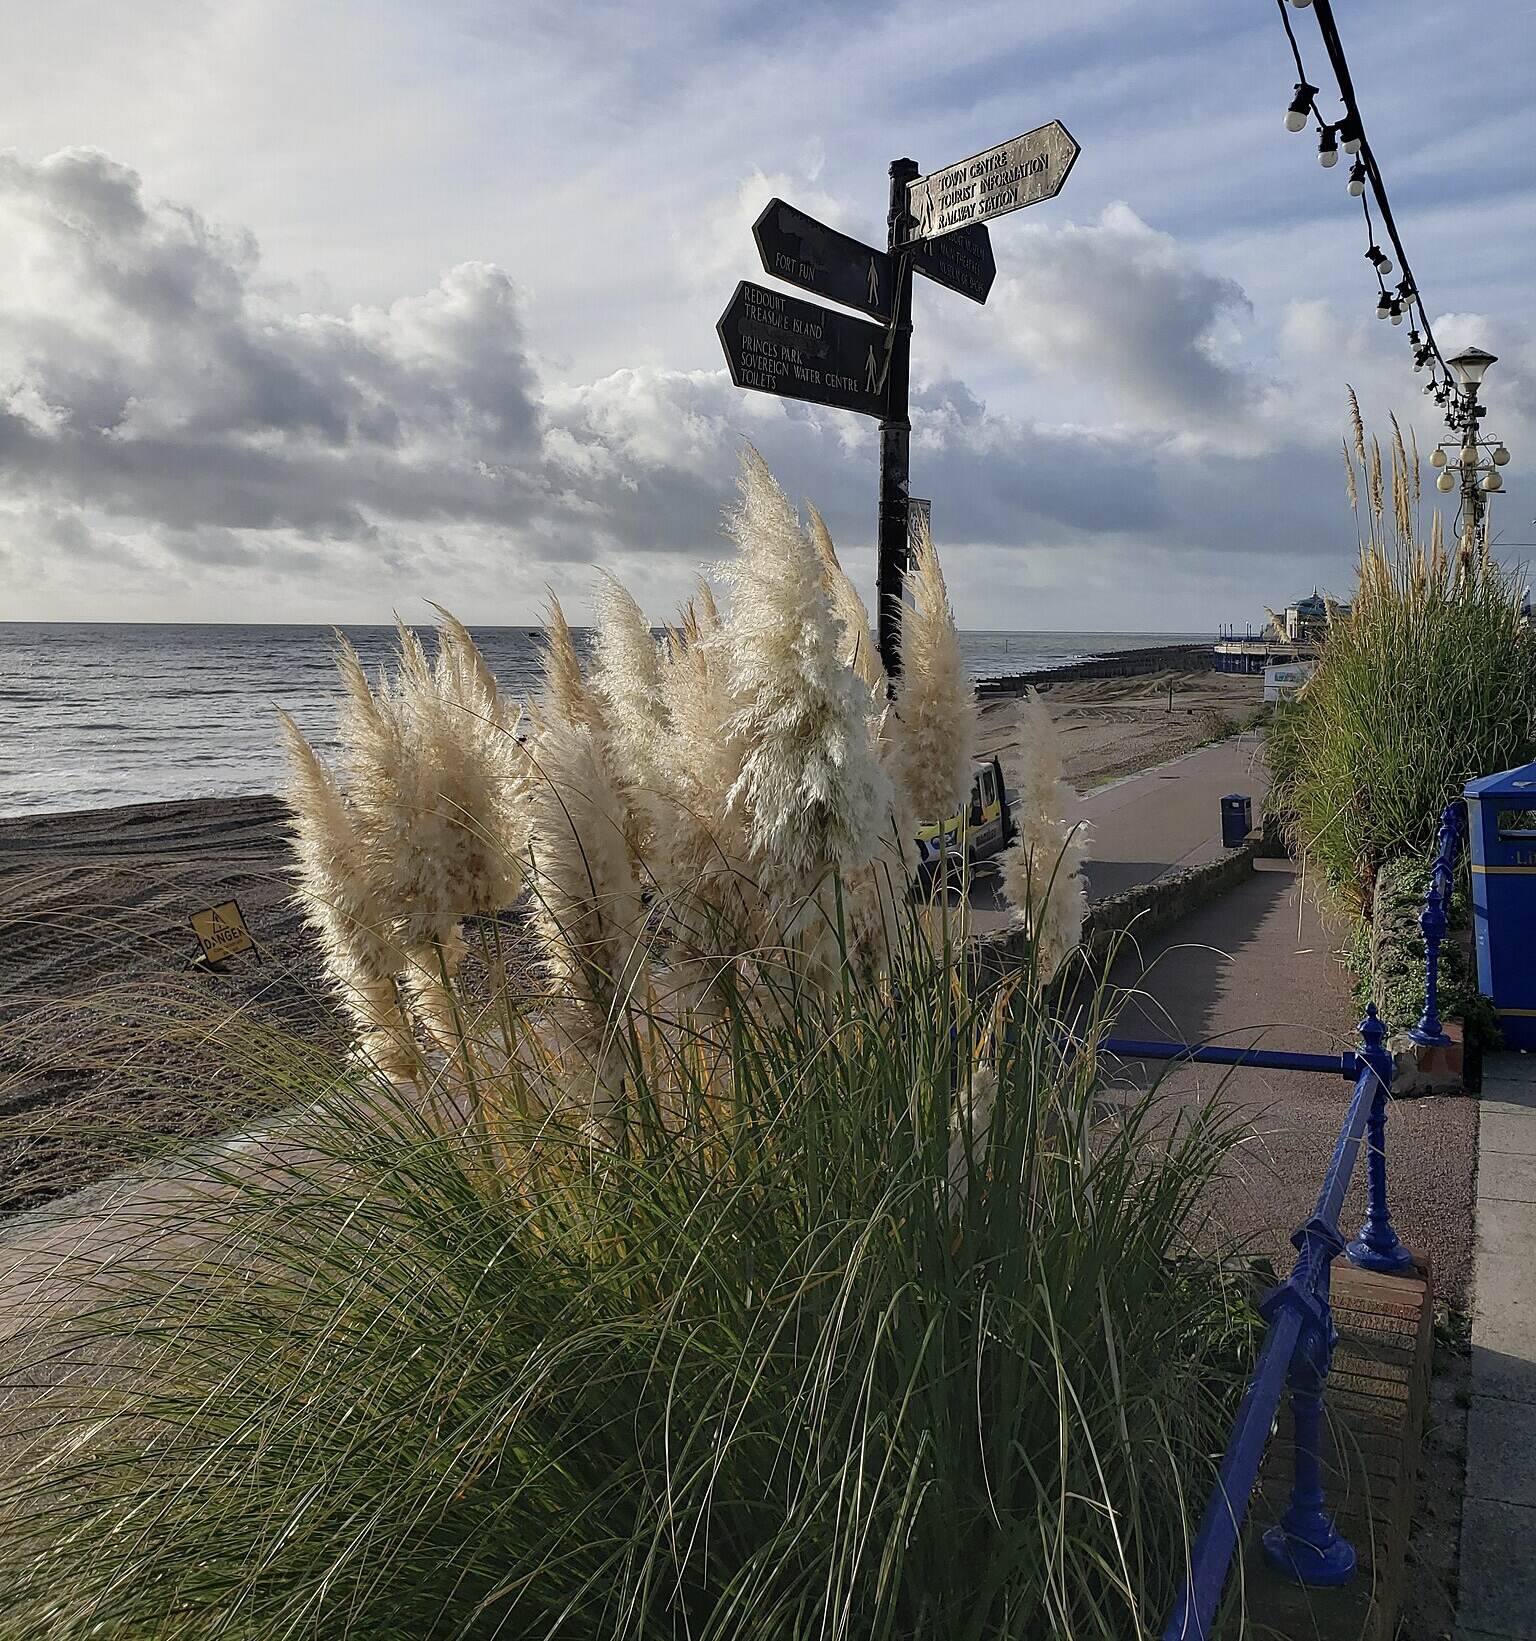 Photograph of a clump of pampas grass lining the beach sidewalk. The grass has large, white, plumelike inflorescences.